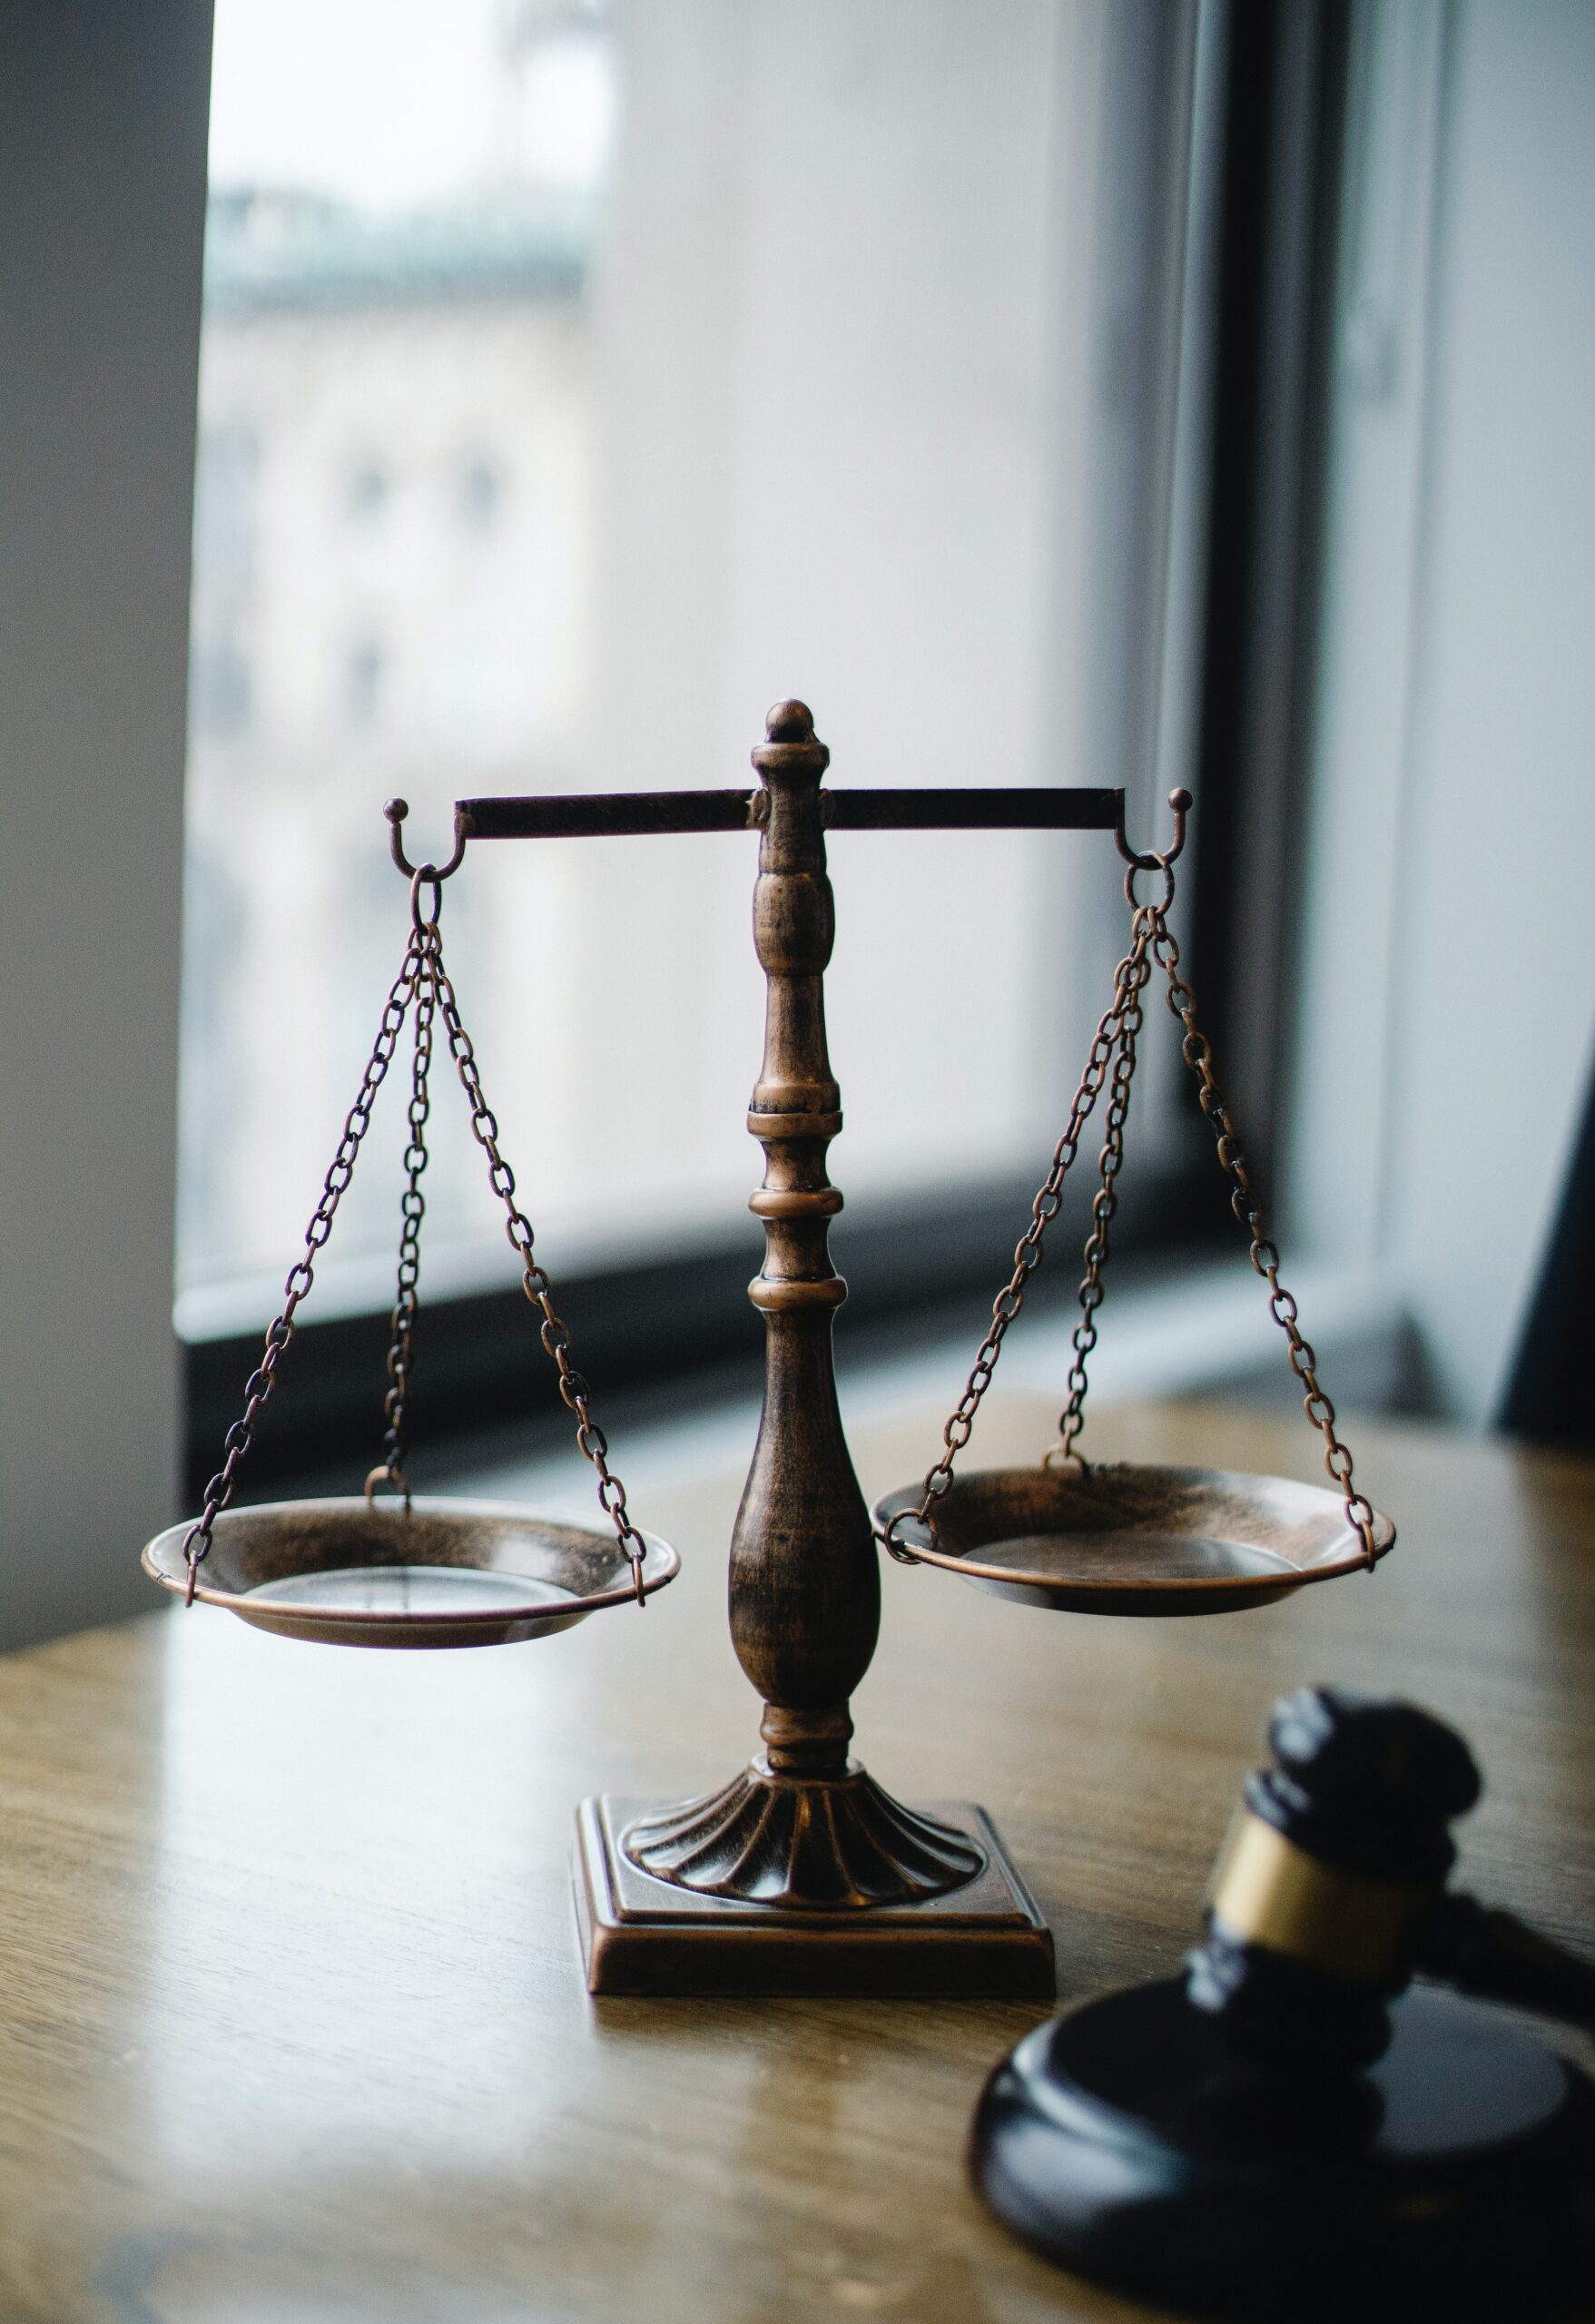 A judgment scale and a gavel in a judge’s office image